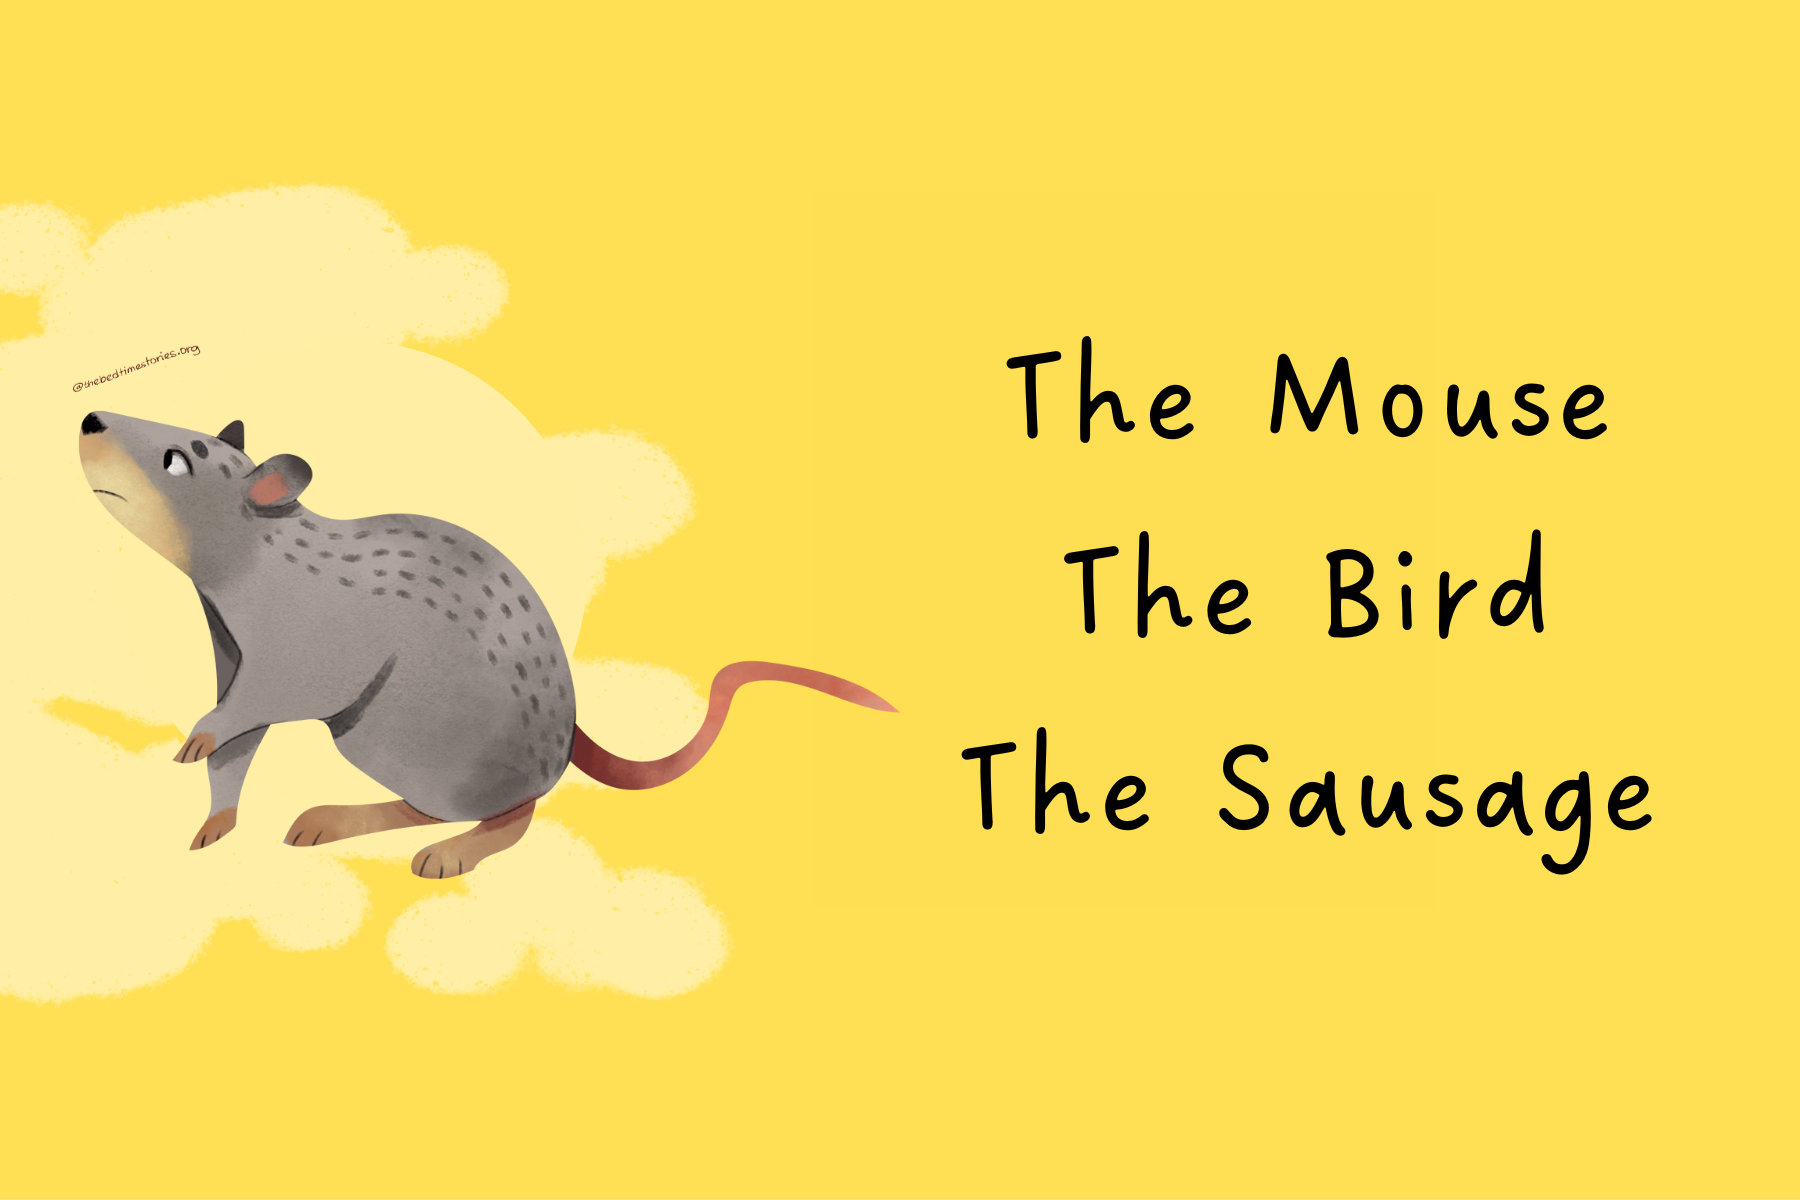 The mouse the bird and the sausage